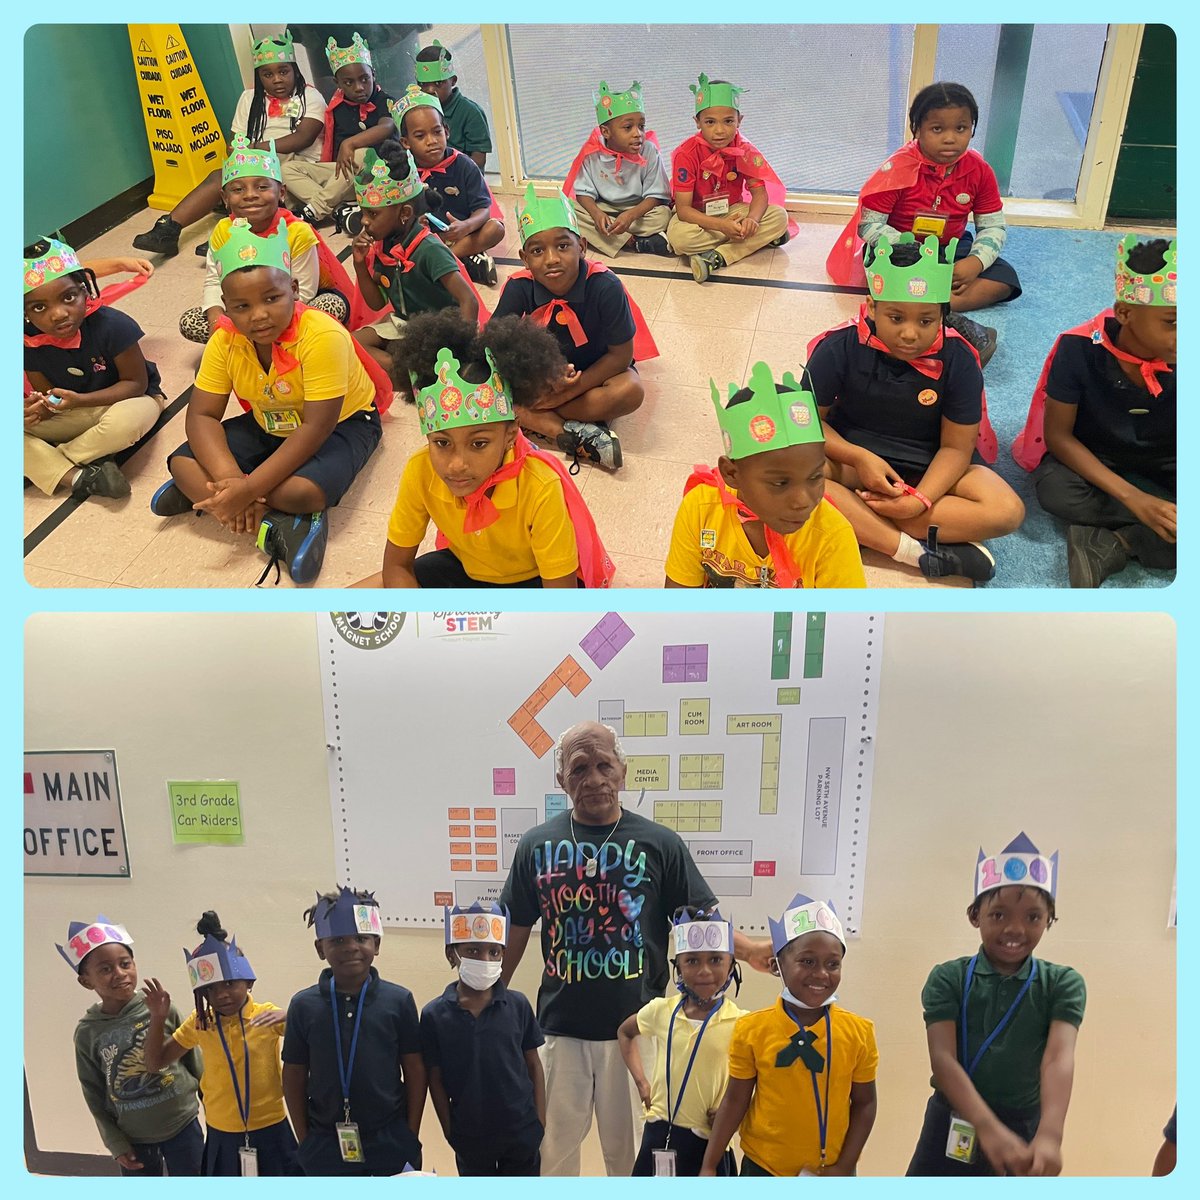 Celebrated the 100th Day of School @RPEMuseummagnet today! We got a peek at what @PrincipalDarby1 will look like when he is 100. @BcpsCentral_ #100thdayofschool